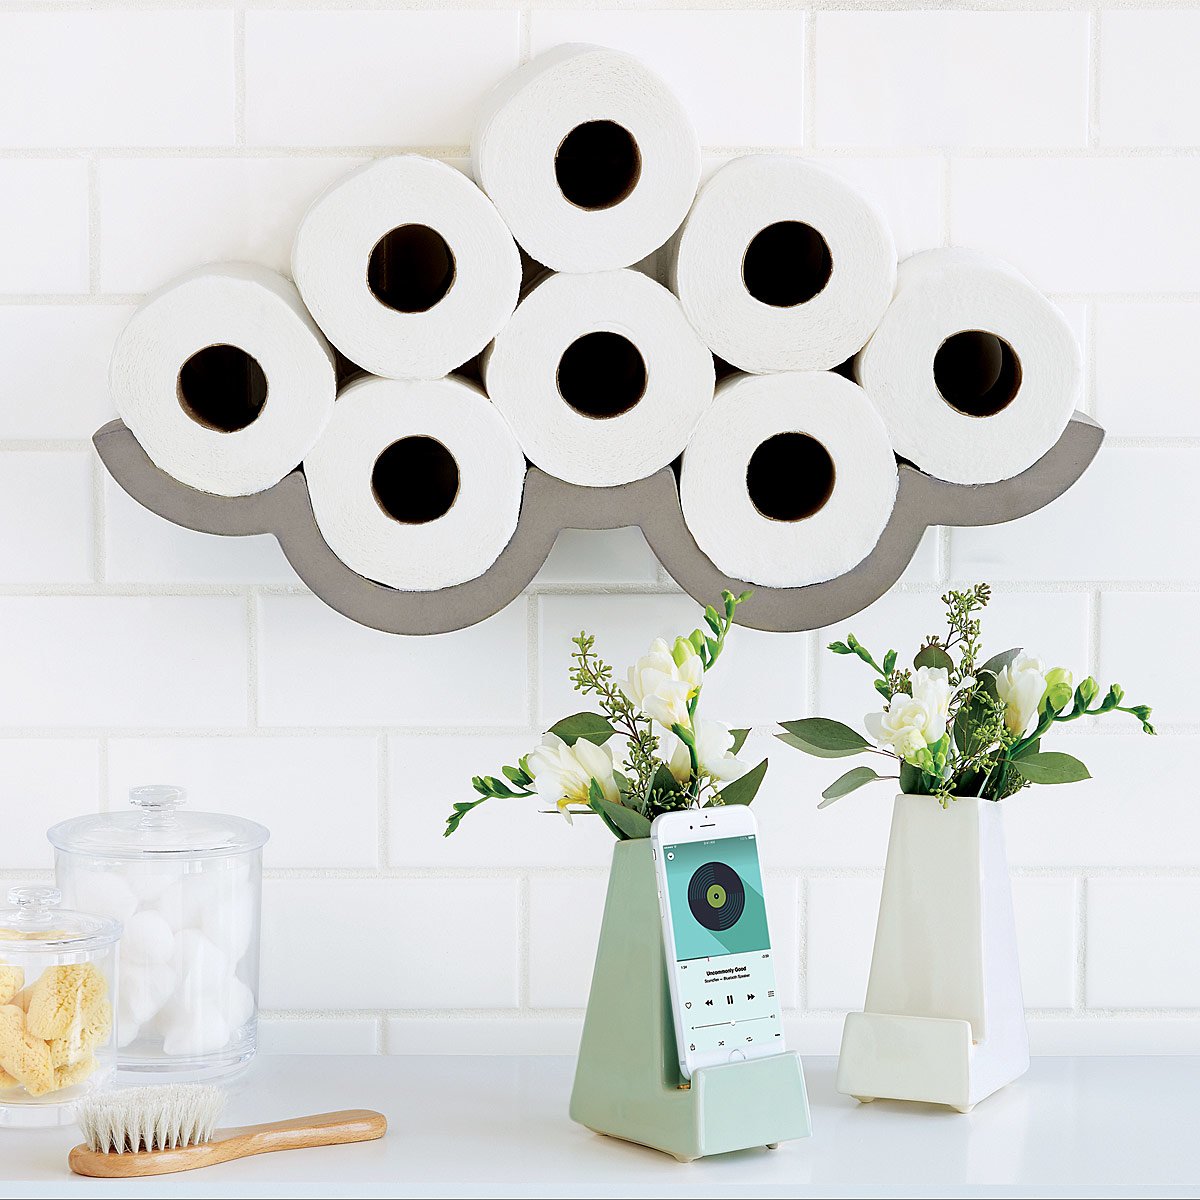 Cloudy Day Toiler Paper Storage | UncommonGoods